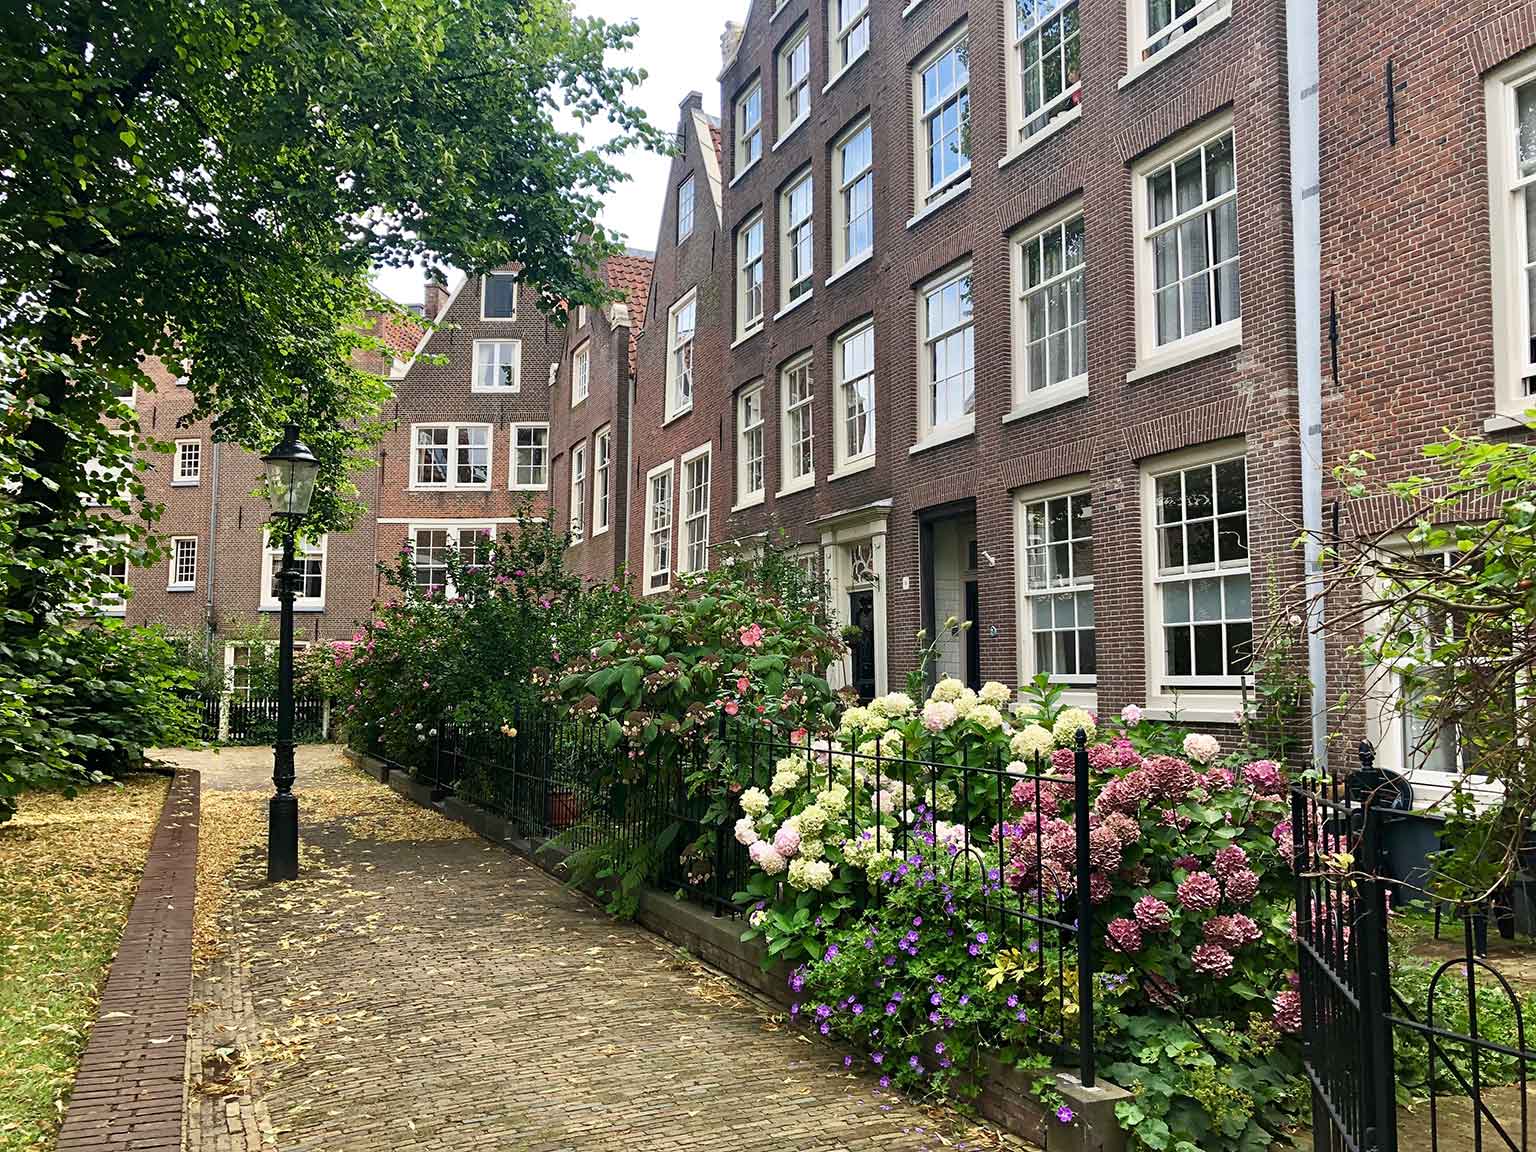 Houses in Begijnhof, Amsterdam, with flowers in the front gardens